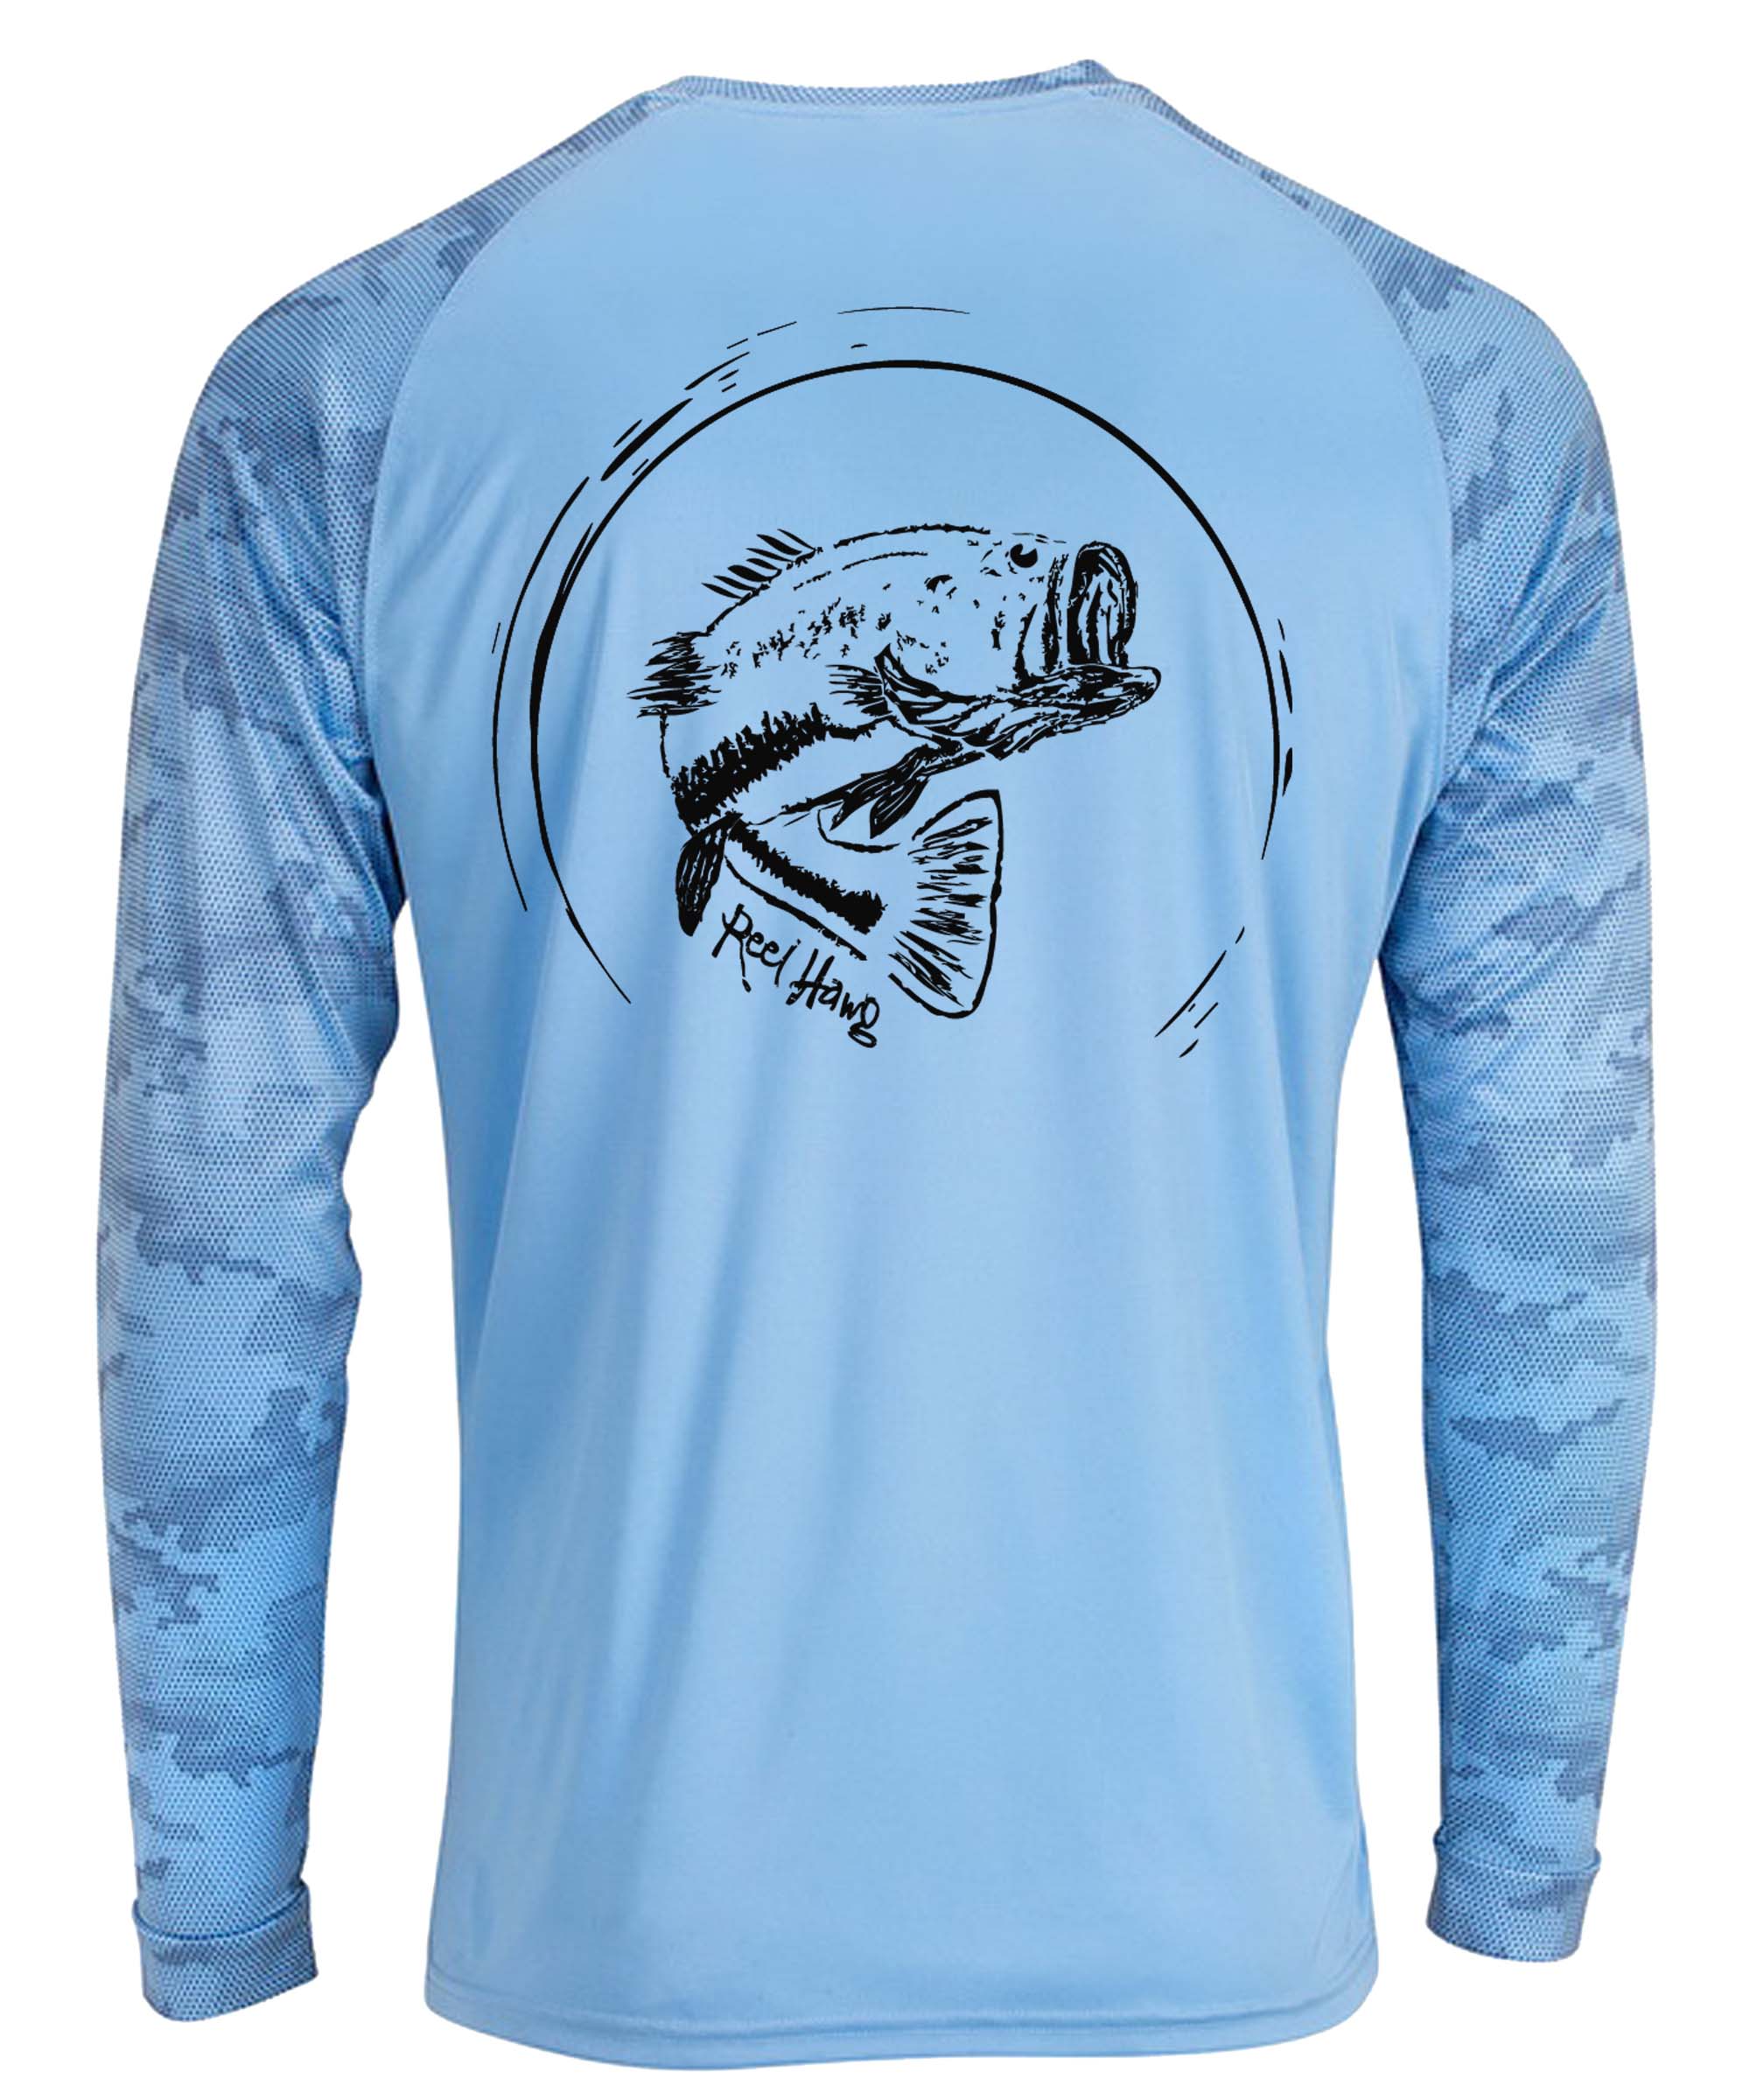 Lixada Long Sleeve Fishing T Shirt UPF 50+ Dri Fit Performance Ls Shirt  with Fish Measuring Sleeve Moisture Wicking Quick Drying Breathable No  Chafing Fishing Clothing Cool Fit X-Large Blue : 